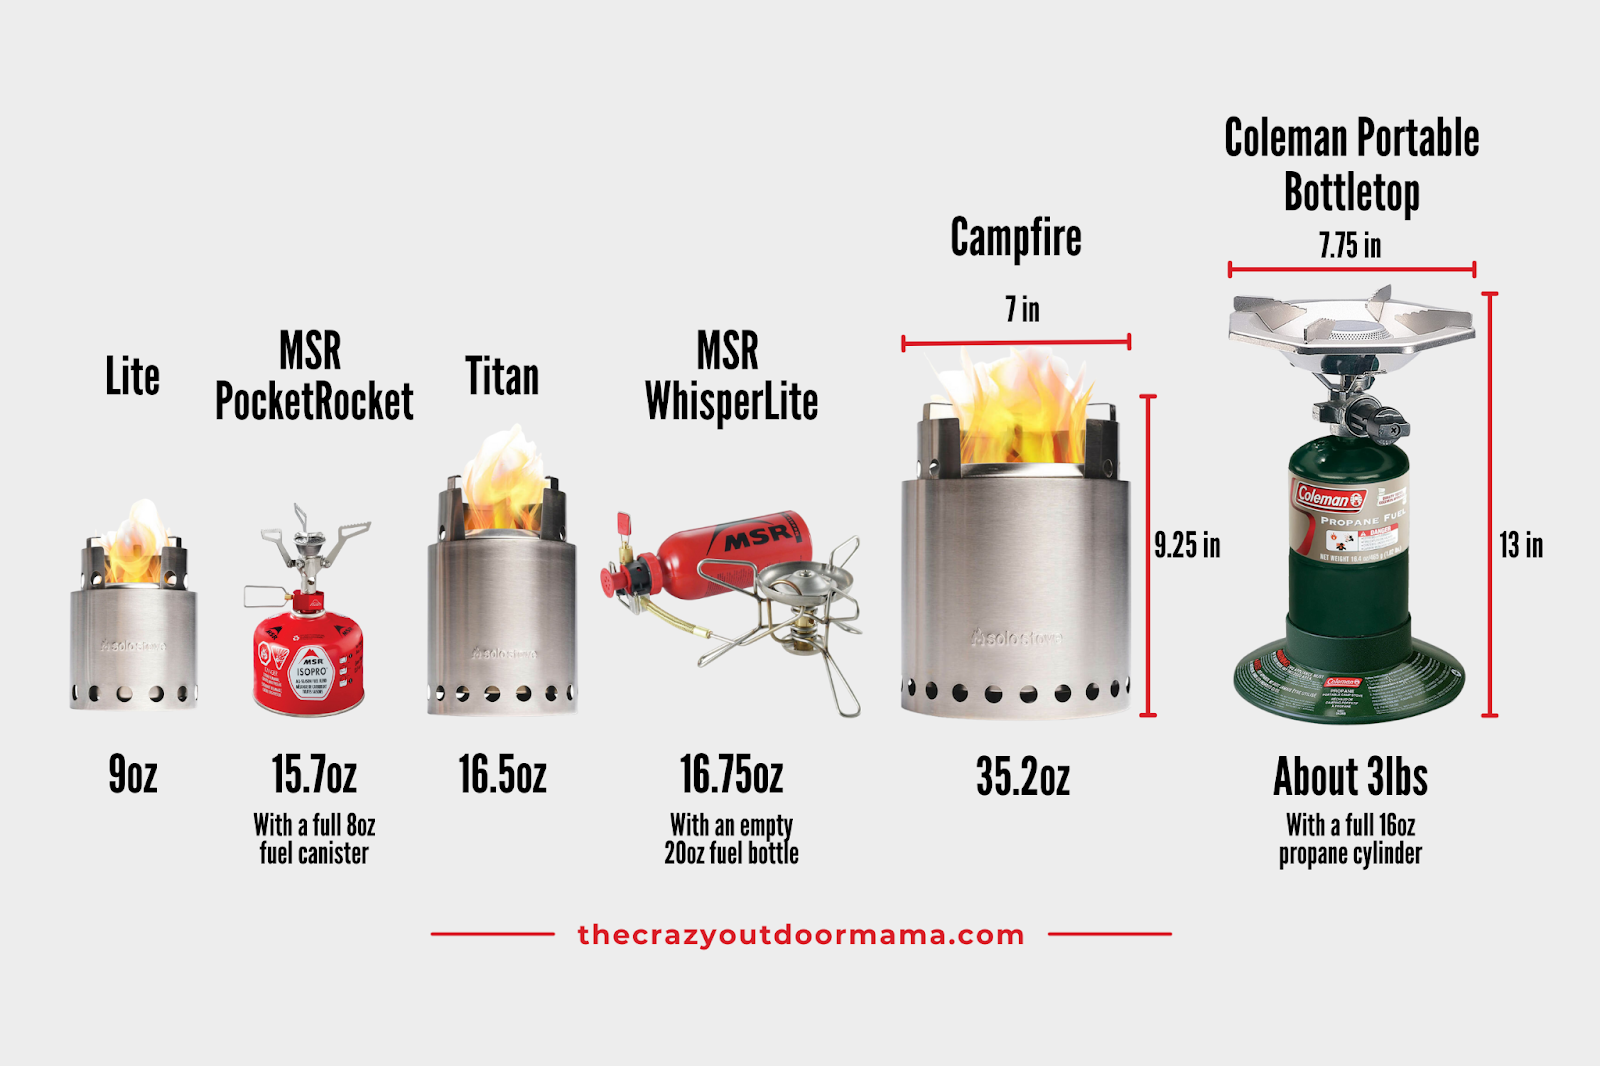 how does solo stove campfire compare to other portable backpacking stoves